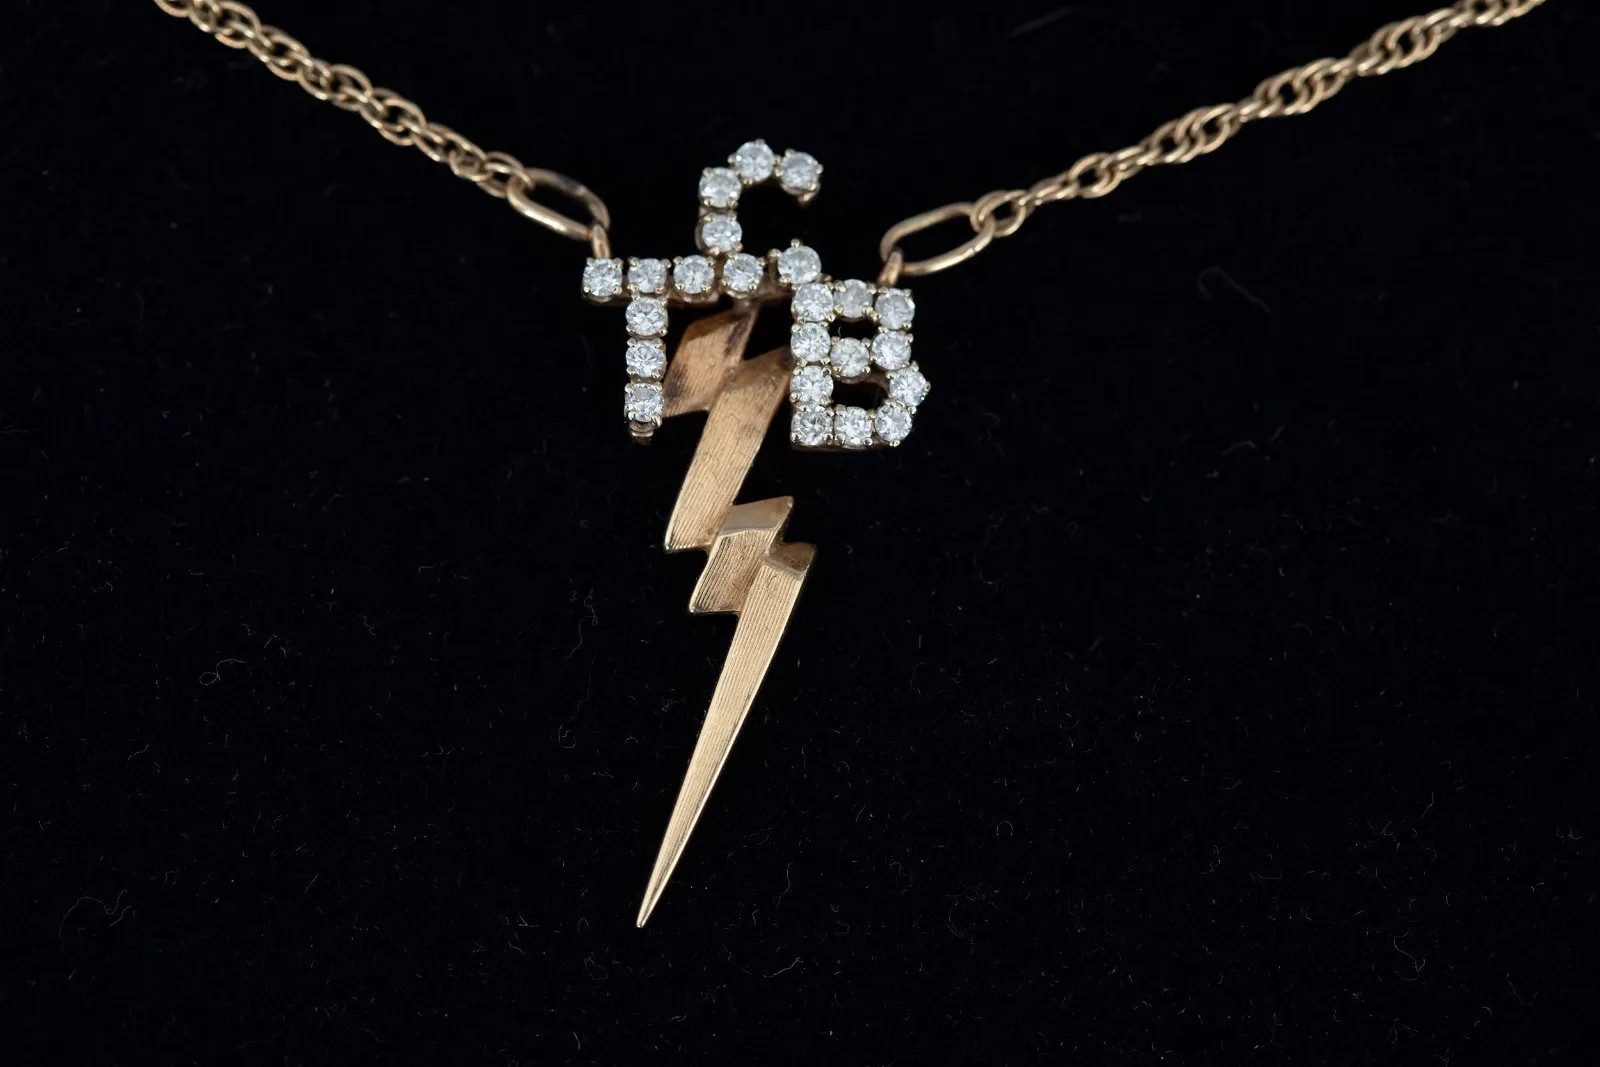 Elvis Presley-gifted Diamond and 14K Taking Care of Business in a Flash necklace, $200,000-$225,000 at GWS Auctions.